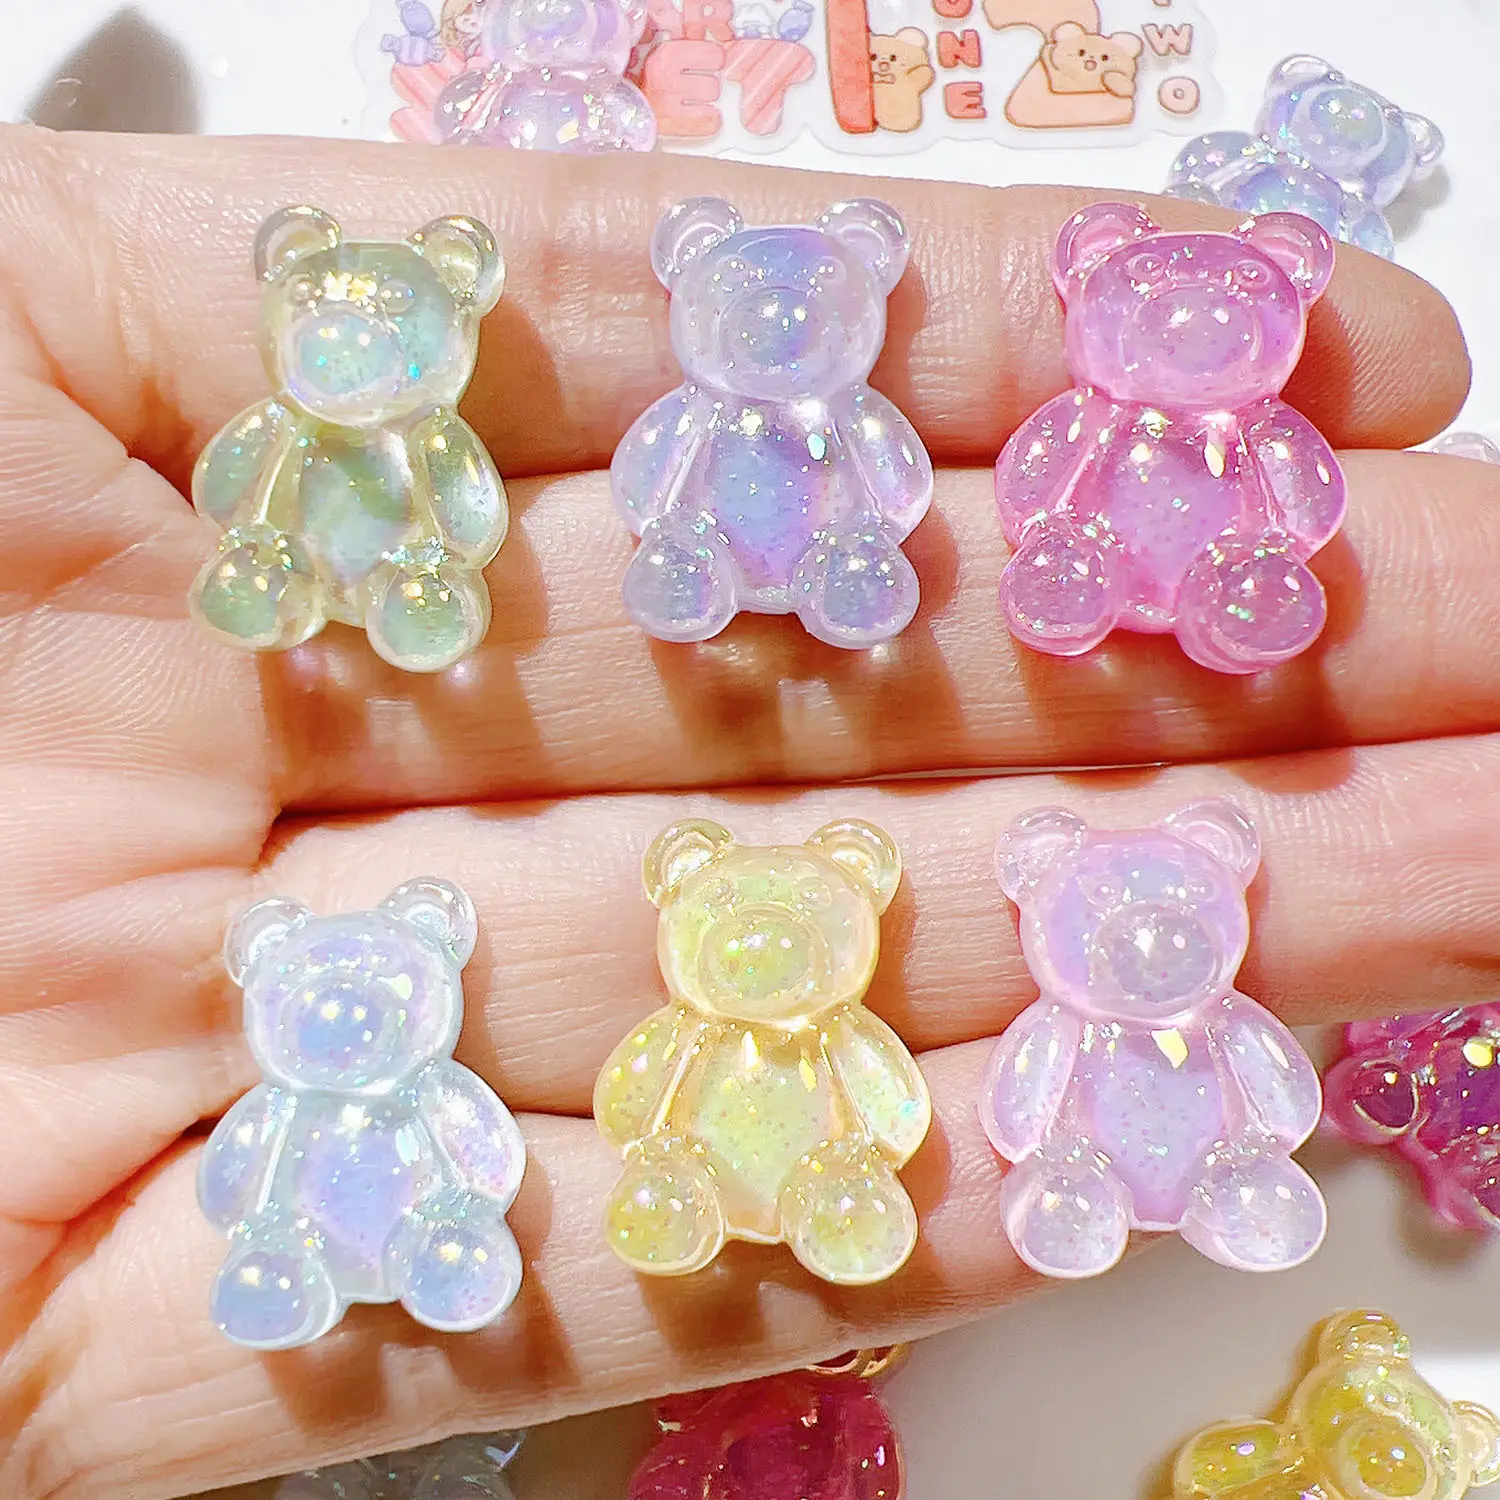 100pcs/bag Glitter Resin Bear Cabochon Flatback Gummy Bear With Sequins Filling for Jewelry Phone Case Decorations